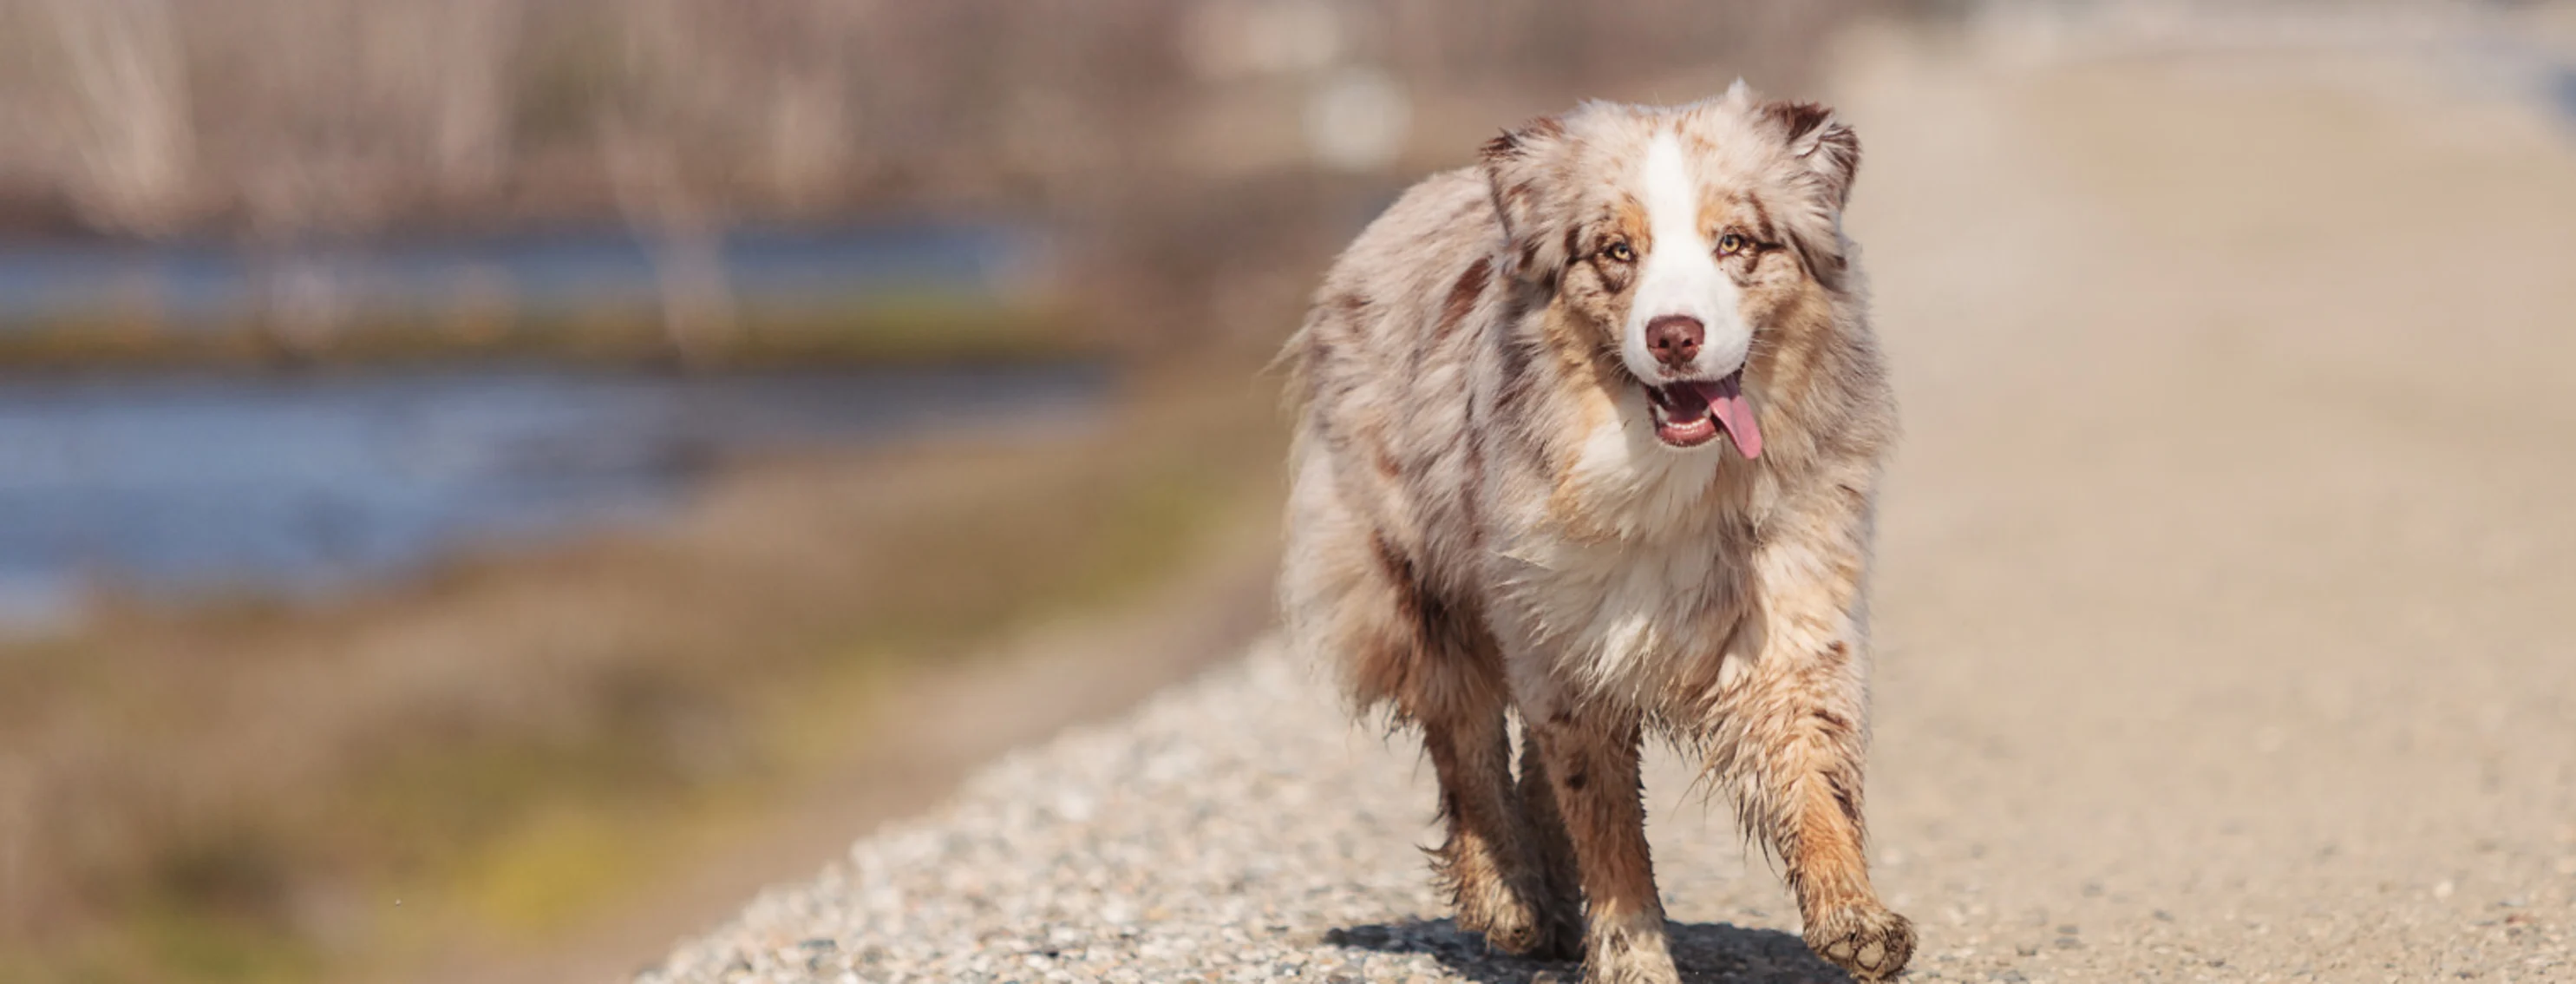 Australian shepherd walking along a dirt road next to water in the New England Region on the United States